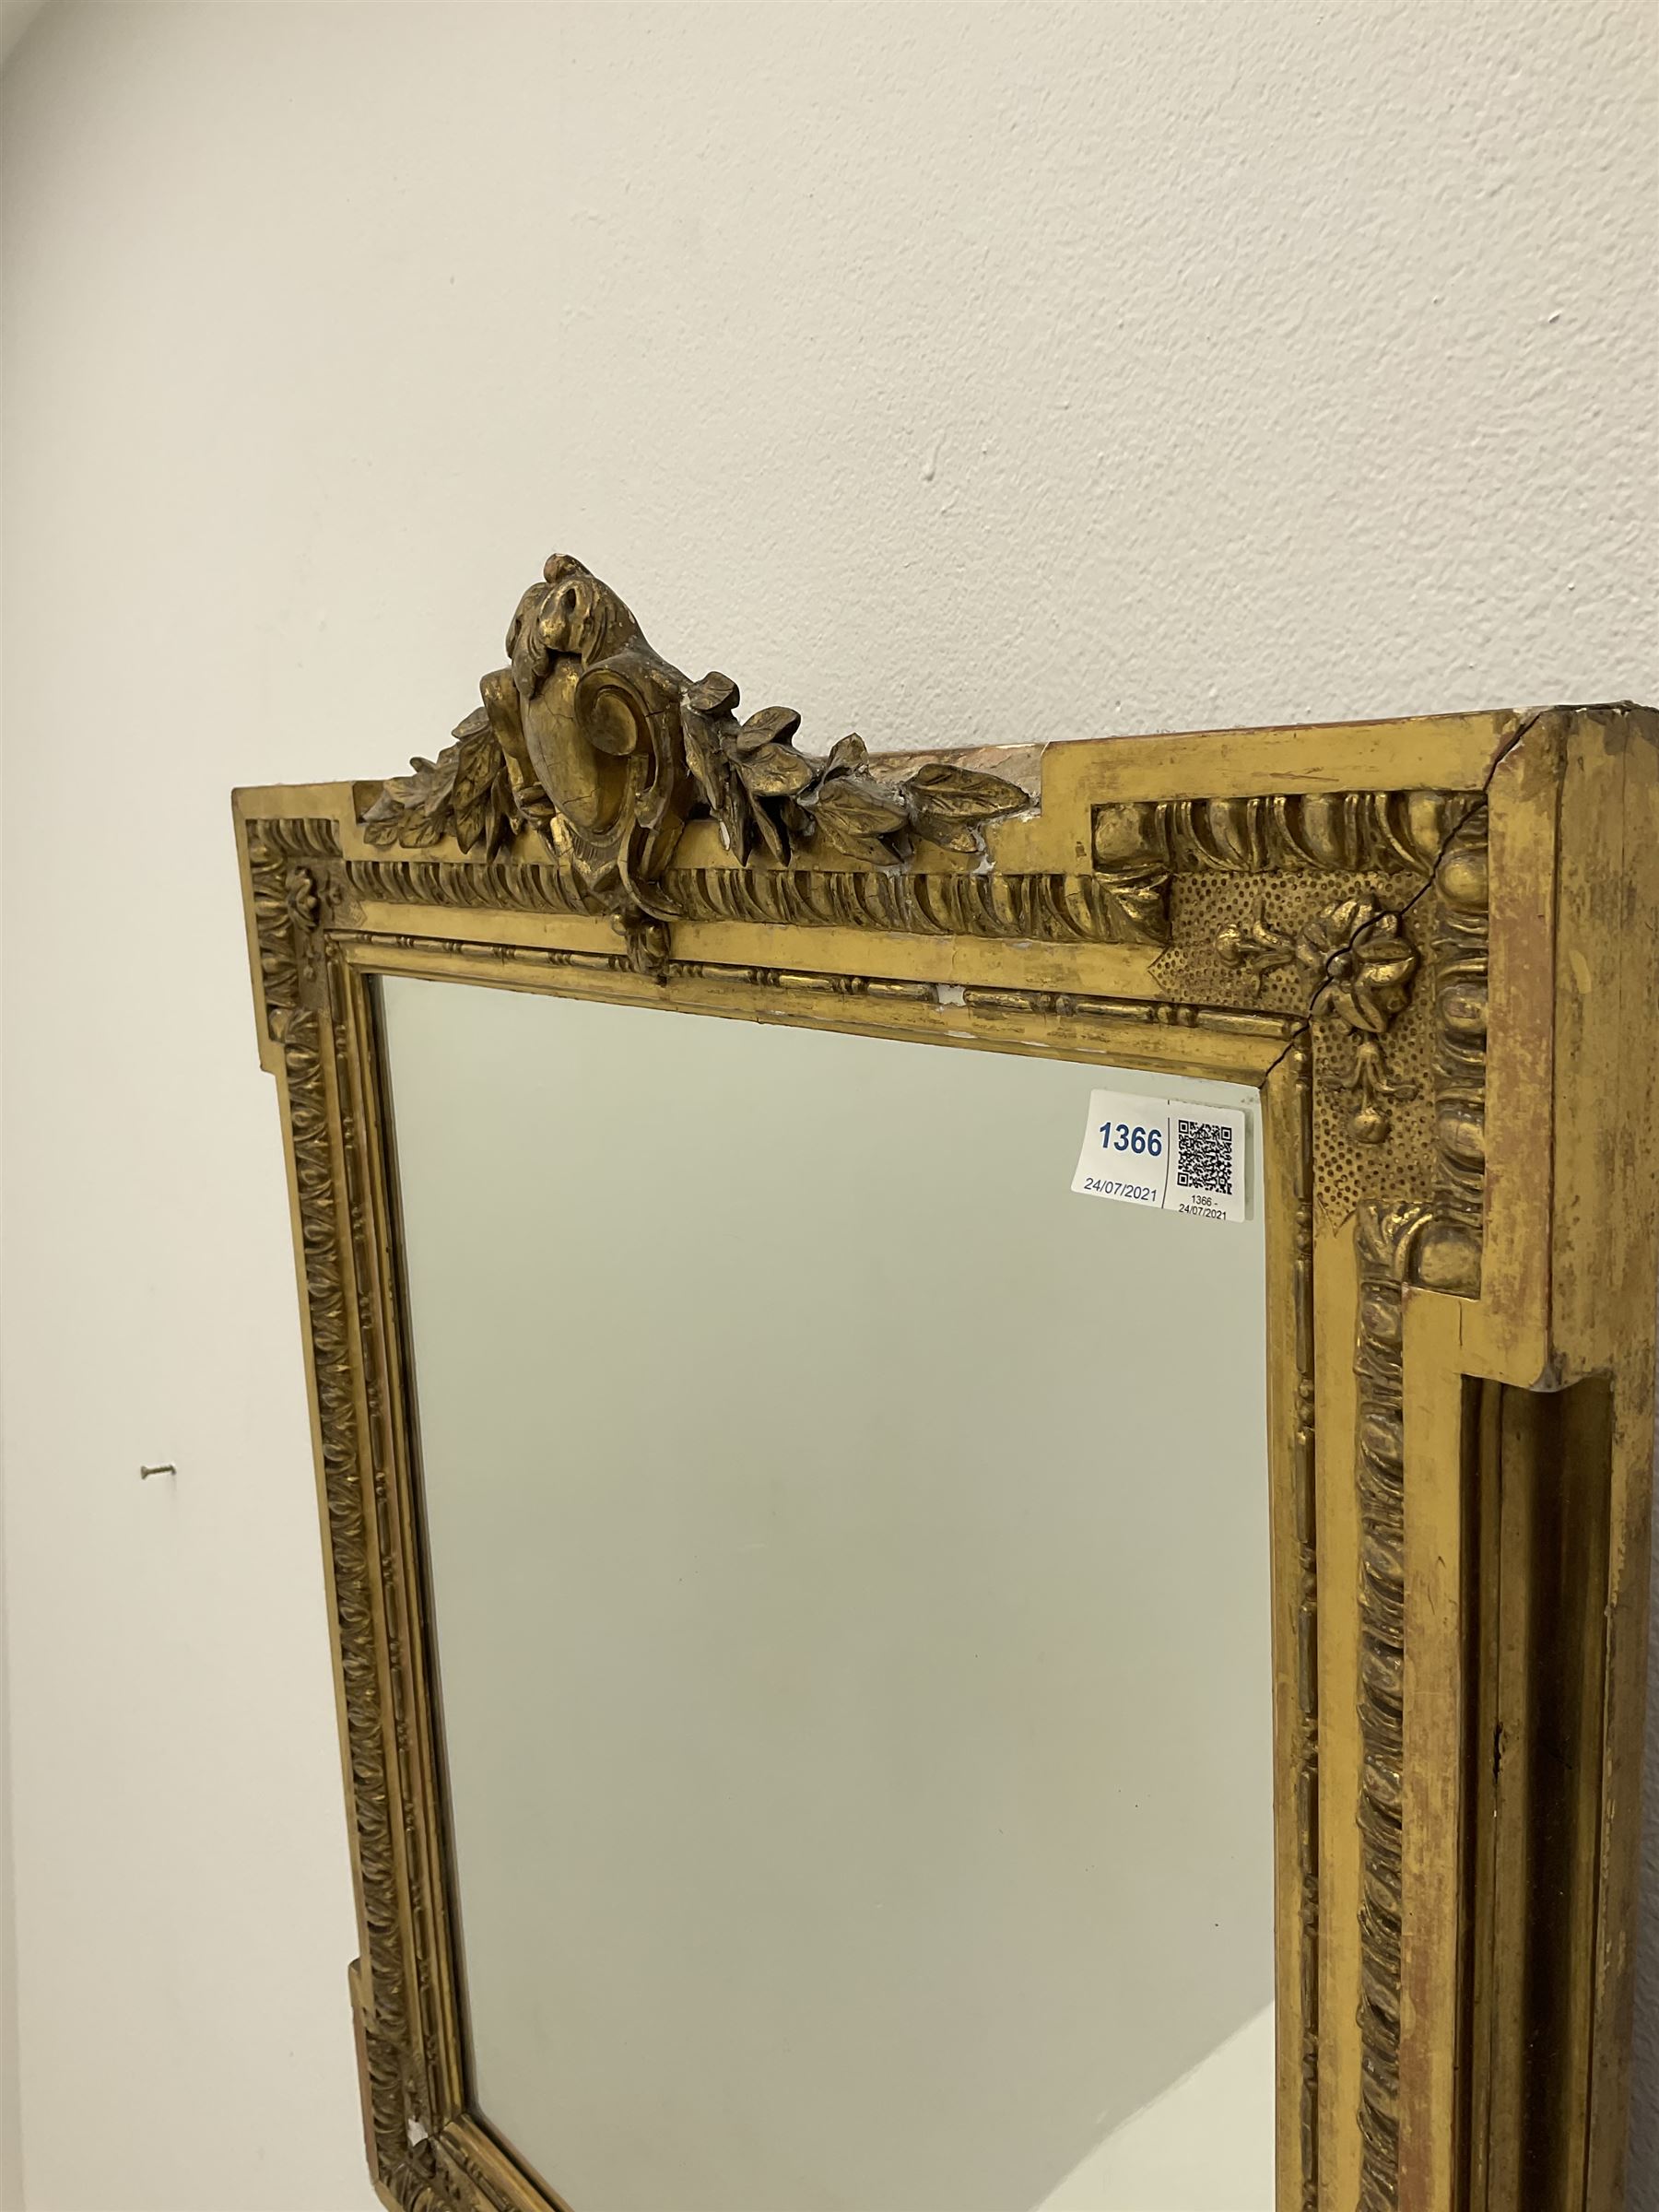 Small guilt framed mirror together with mahogany framed mirror - Image 2 of 3